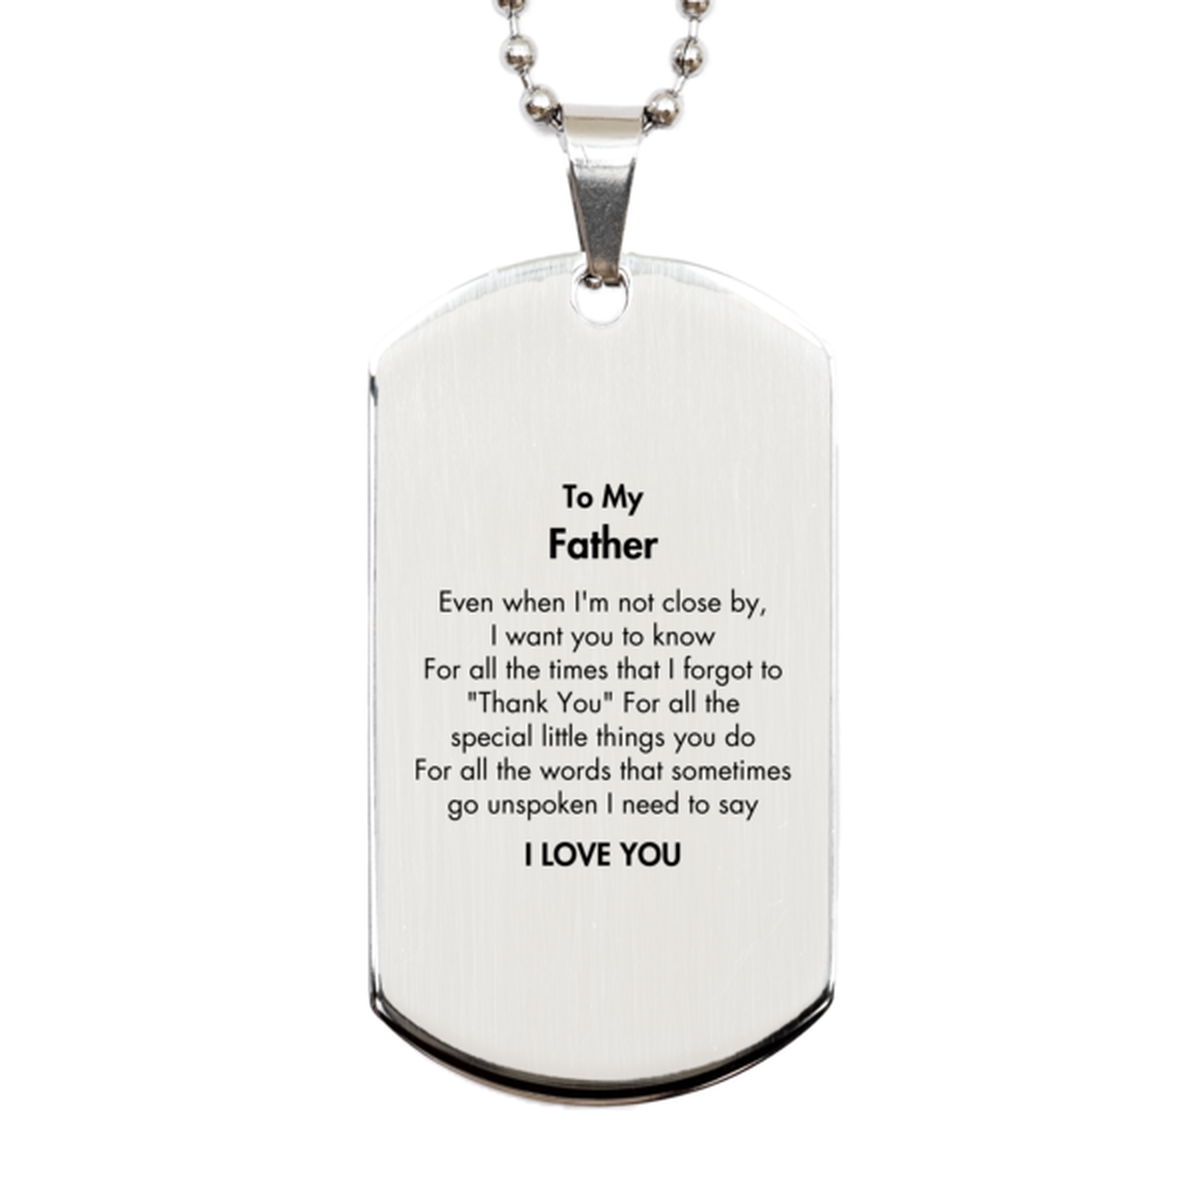 Thank You Gifts for Father, Keepsake Silver Dog Tag Gifts for Father Birthday Mother's day Father's Day Father For all the words That sometimes go unspoken I need to say I LOVE YOU